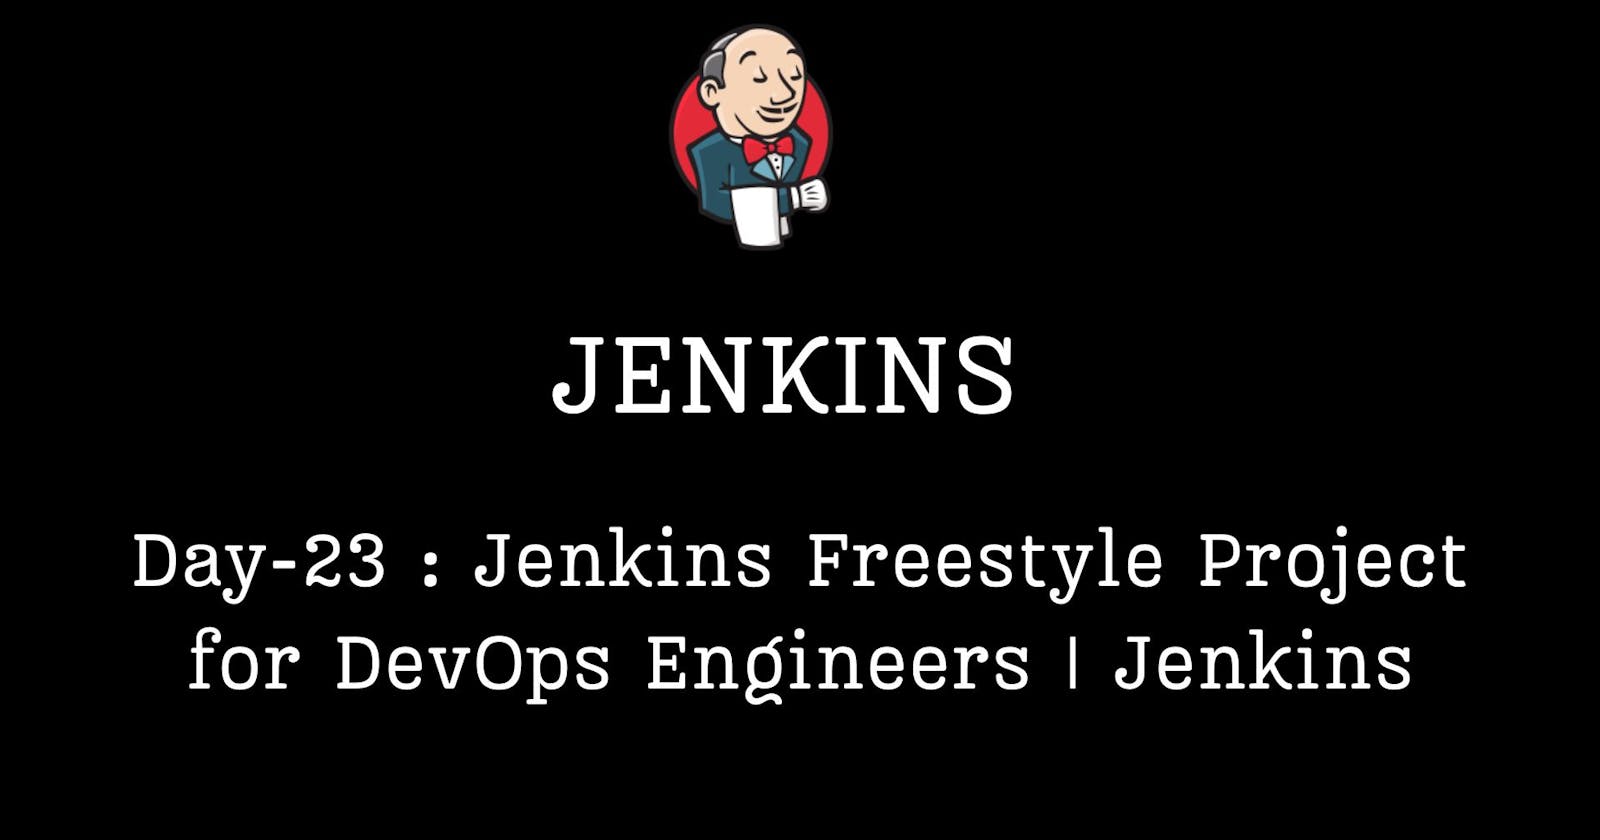 Day-23 : Jenkins Freestyle Project for DevOps Engineers